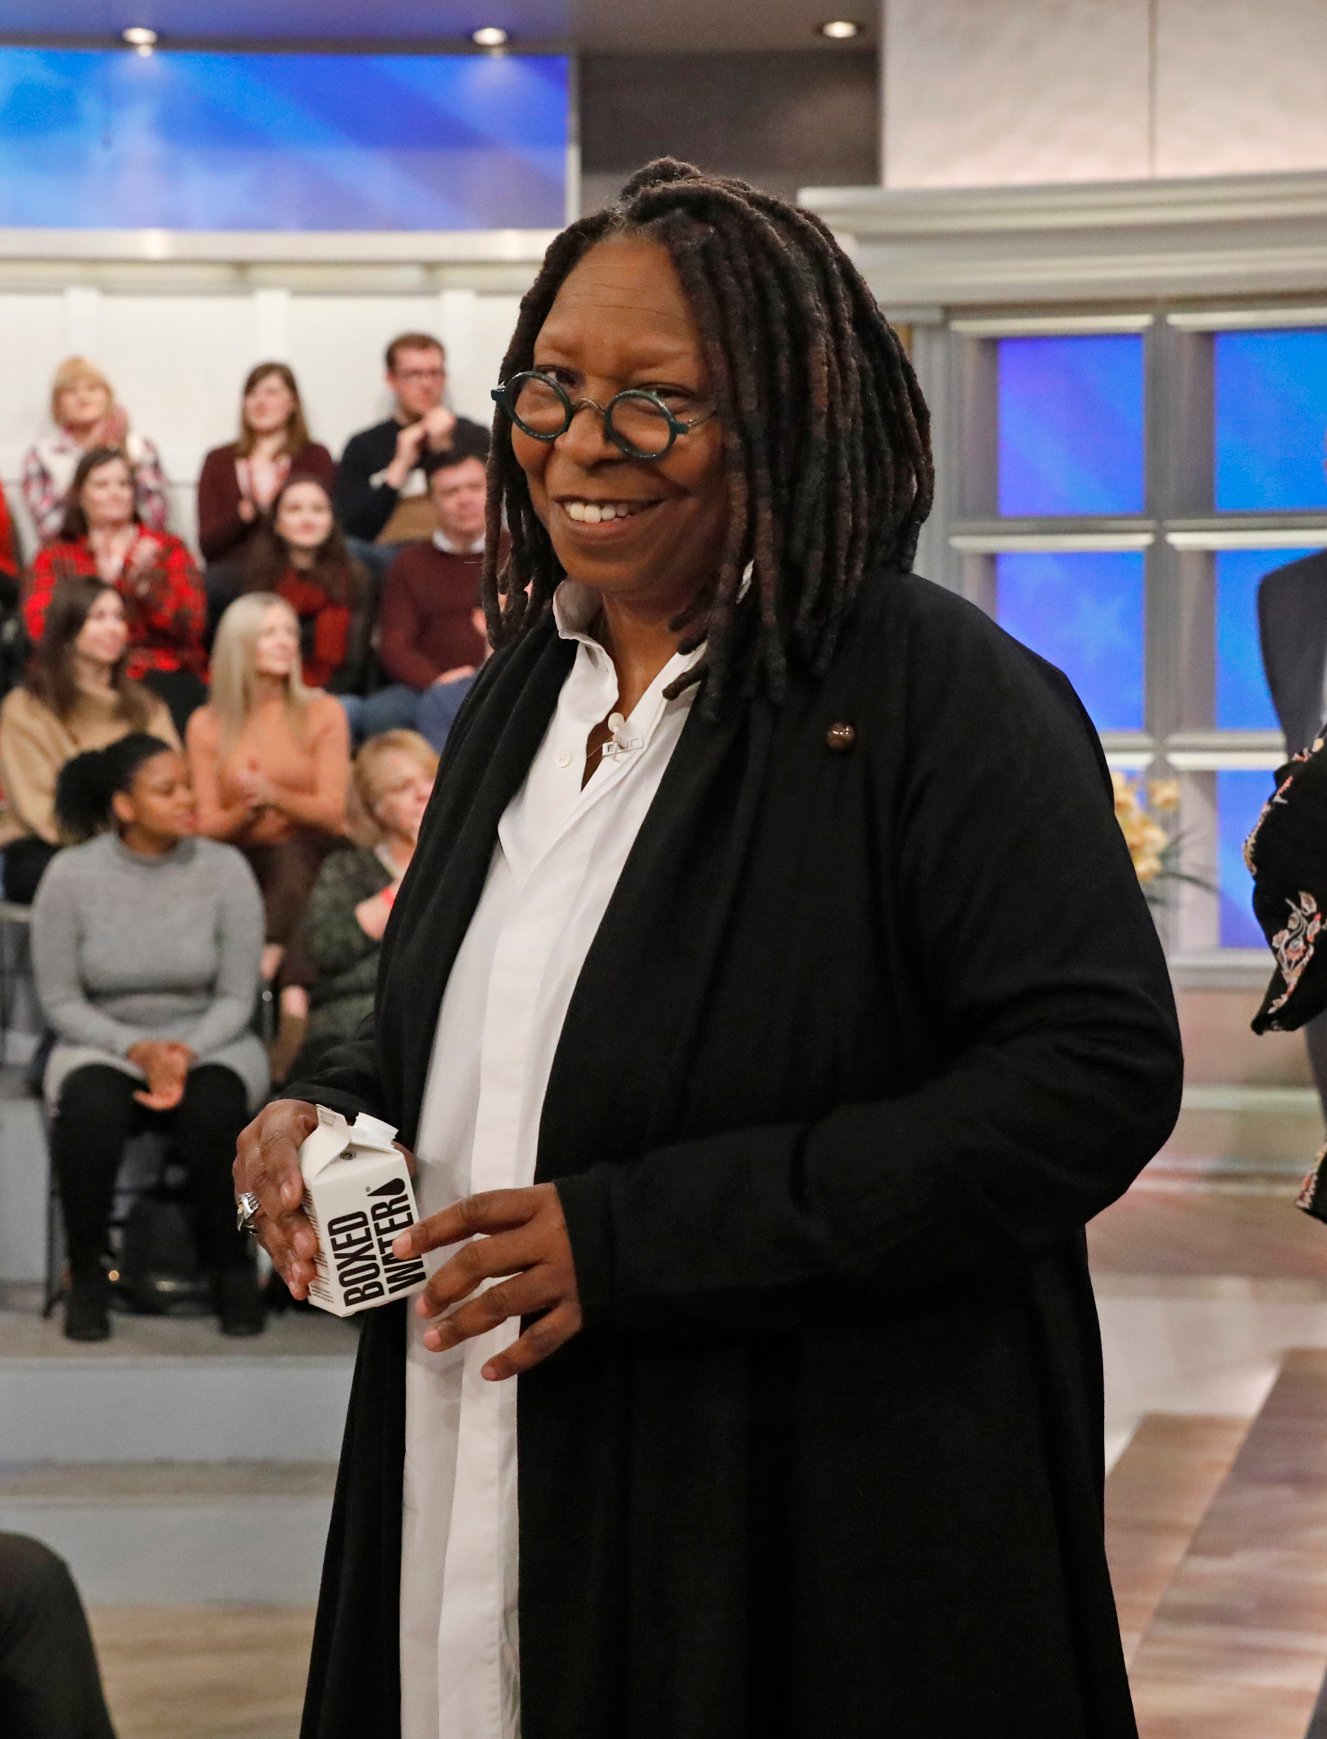 Whoopi Goldberg on the set of 'The View' in 2019